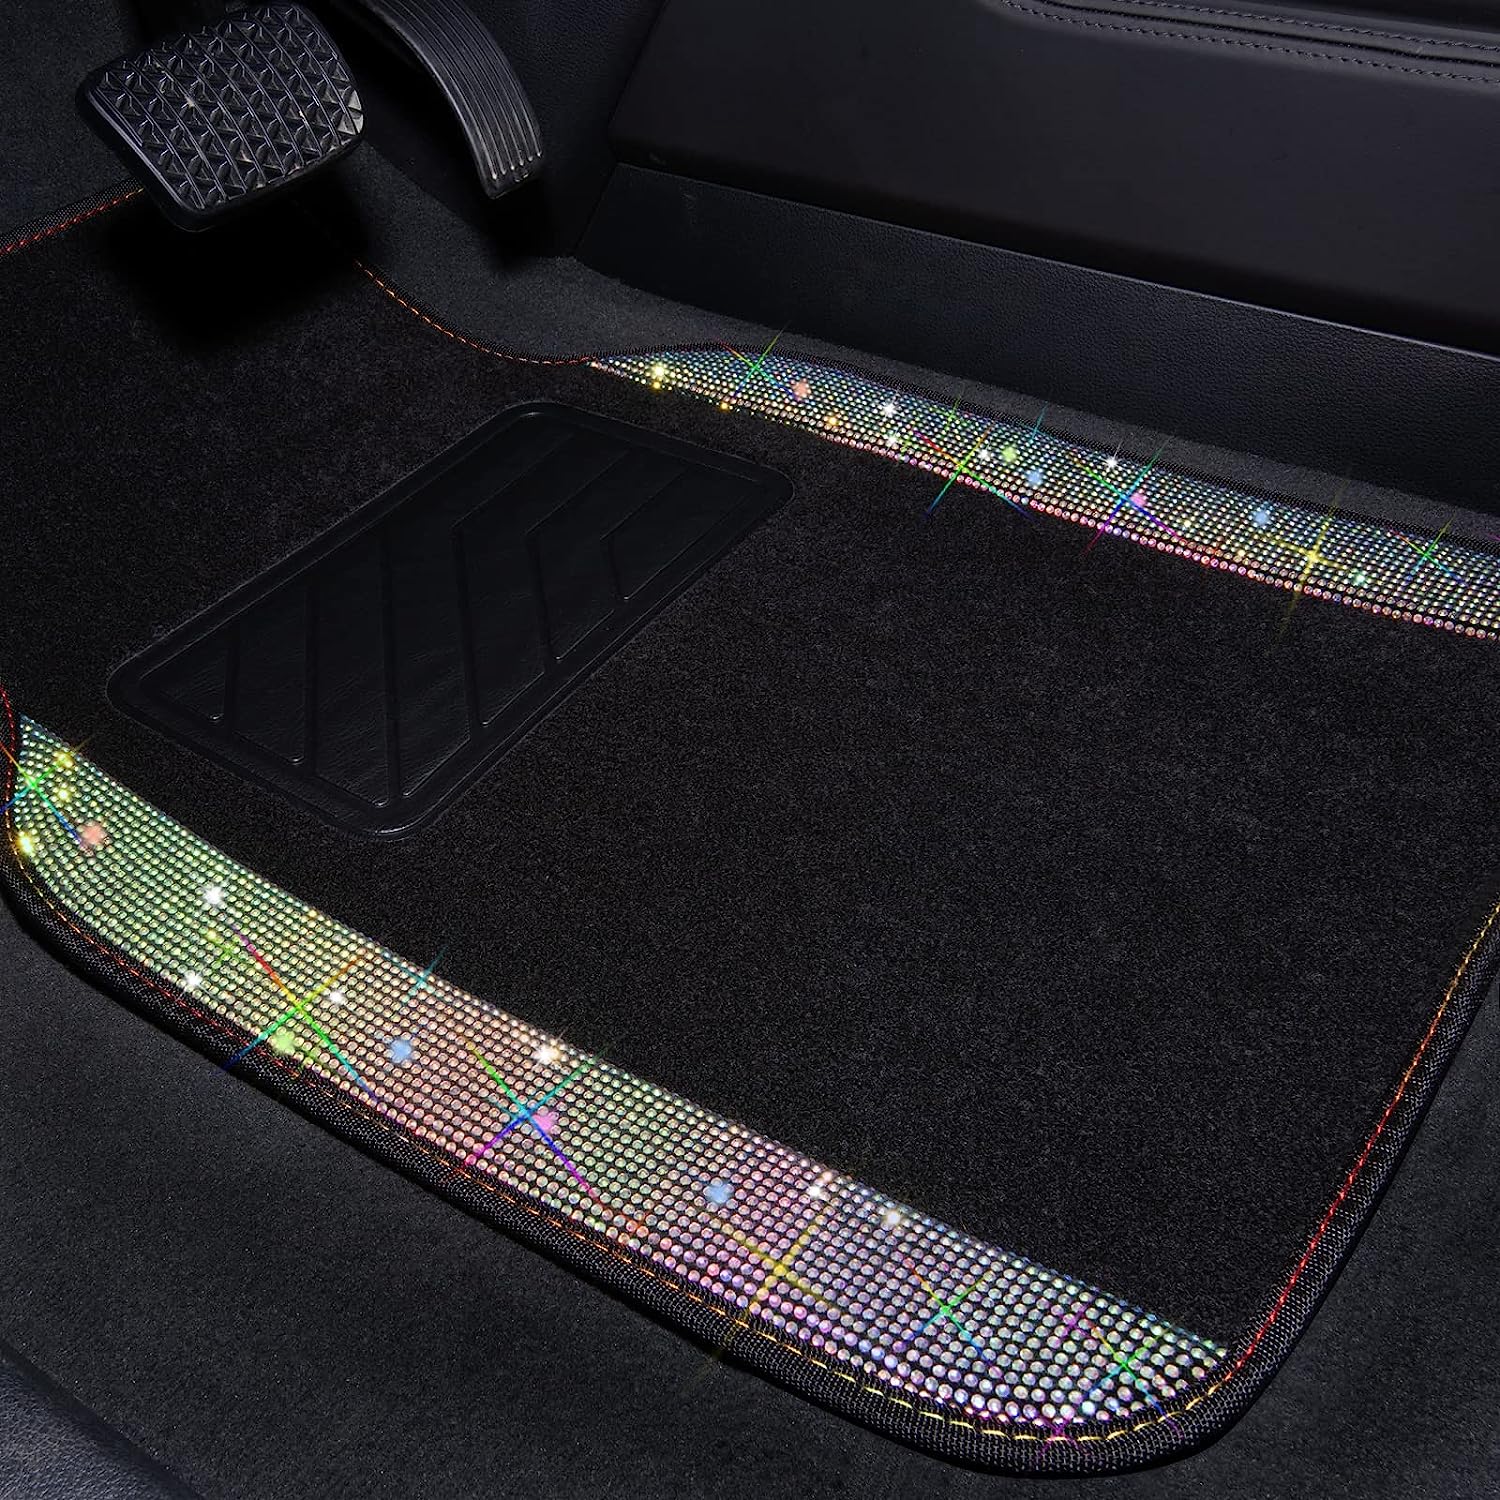 CAR PASS Diamond Car Floor Mats & Pink Leather Steering Wheel Cover, with Bling Crystal Rhinestones Universal Fit 14" 1/2-15" Crystal Glitter for Women Sparkle Girl